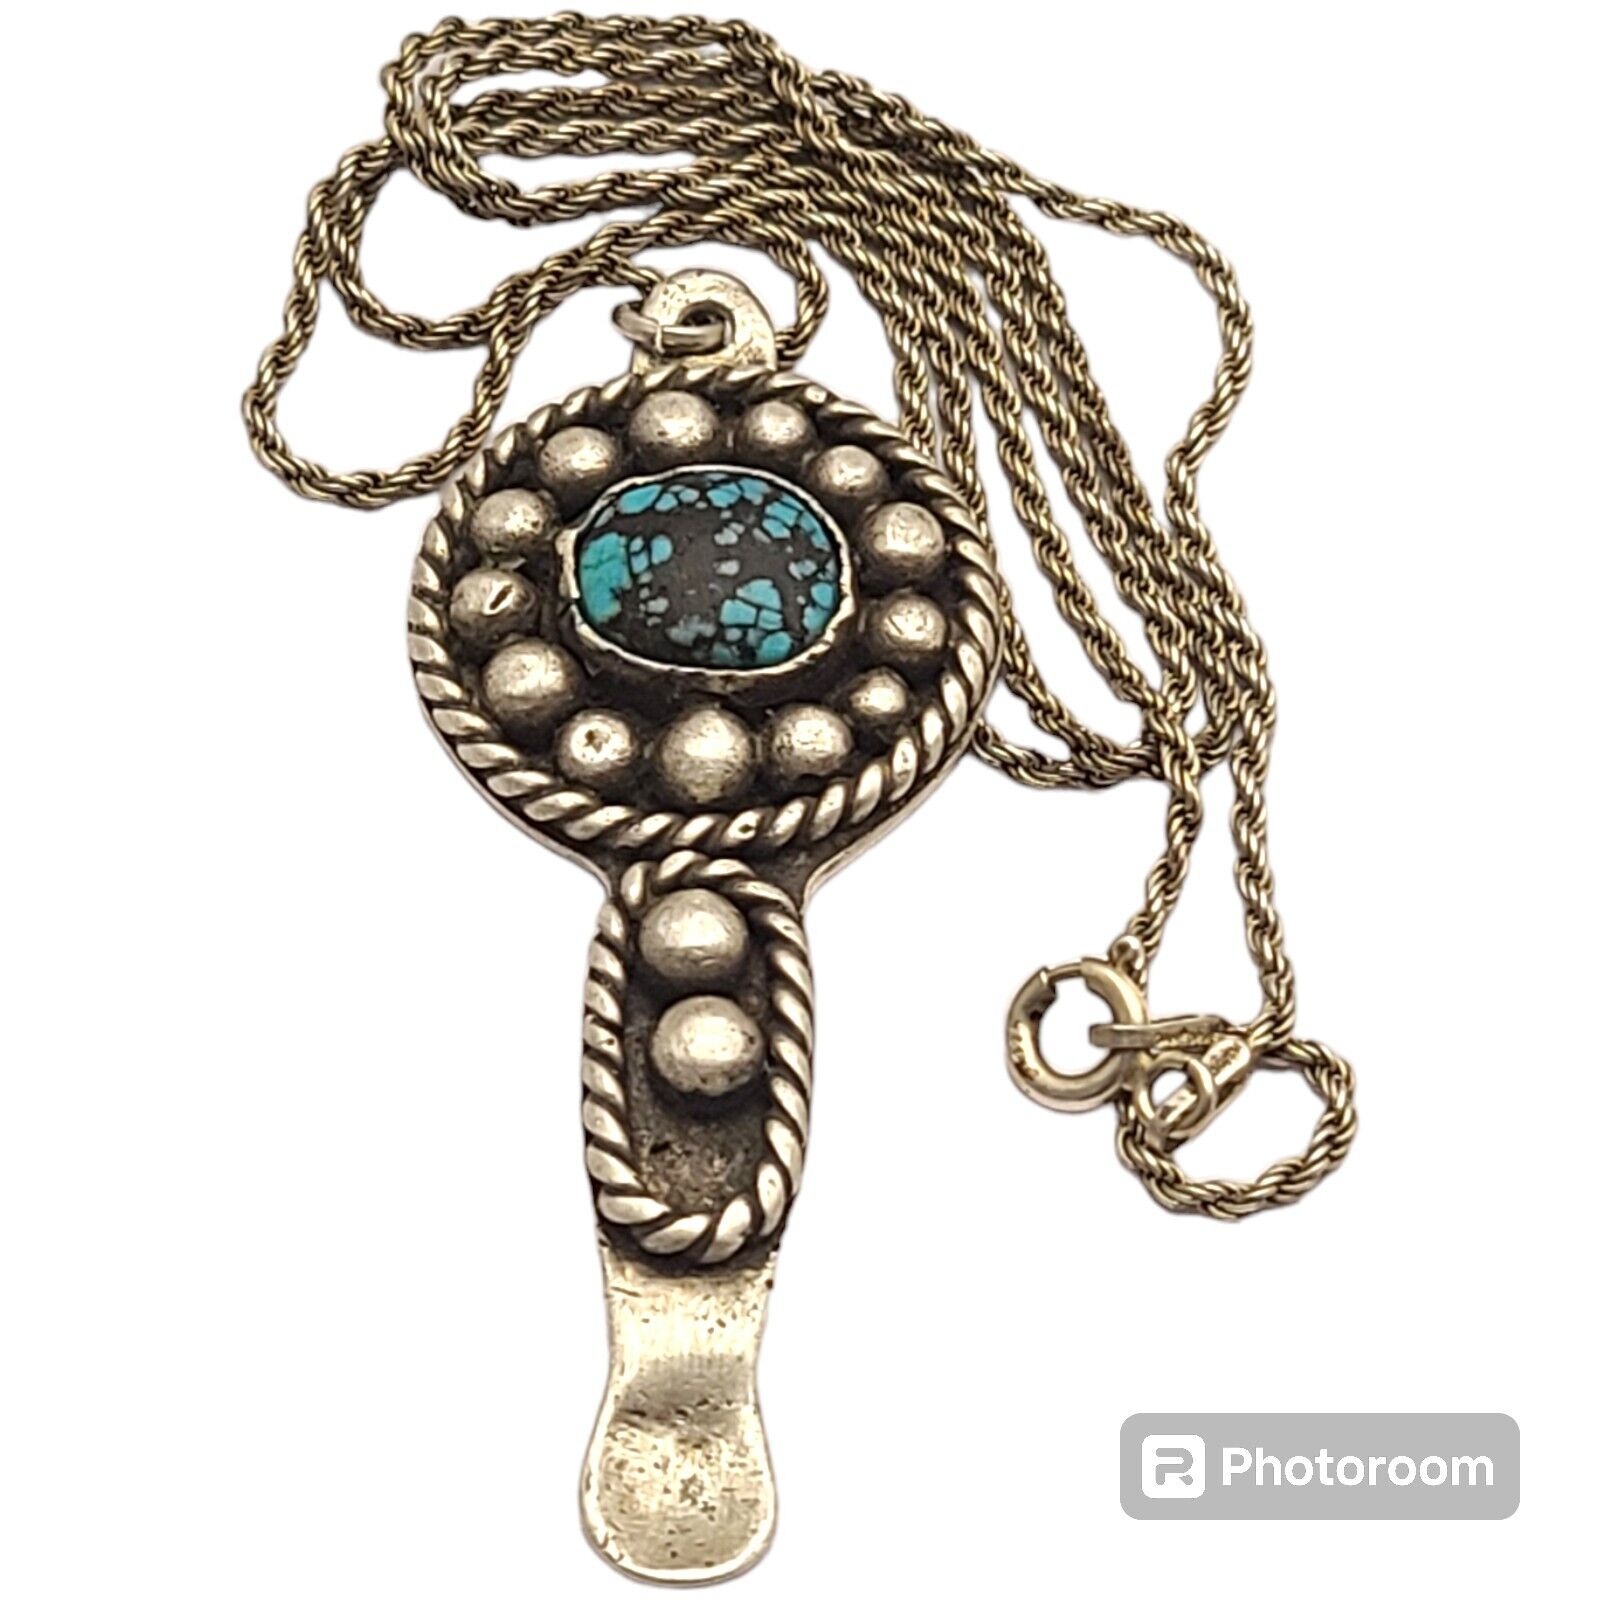 Important Navajo Blue Gem Turquoise Sterling Silver Spoon Pendant Necklace,